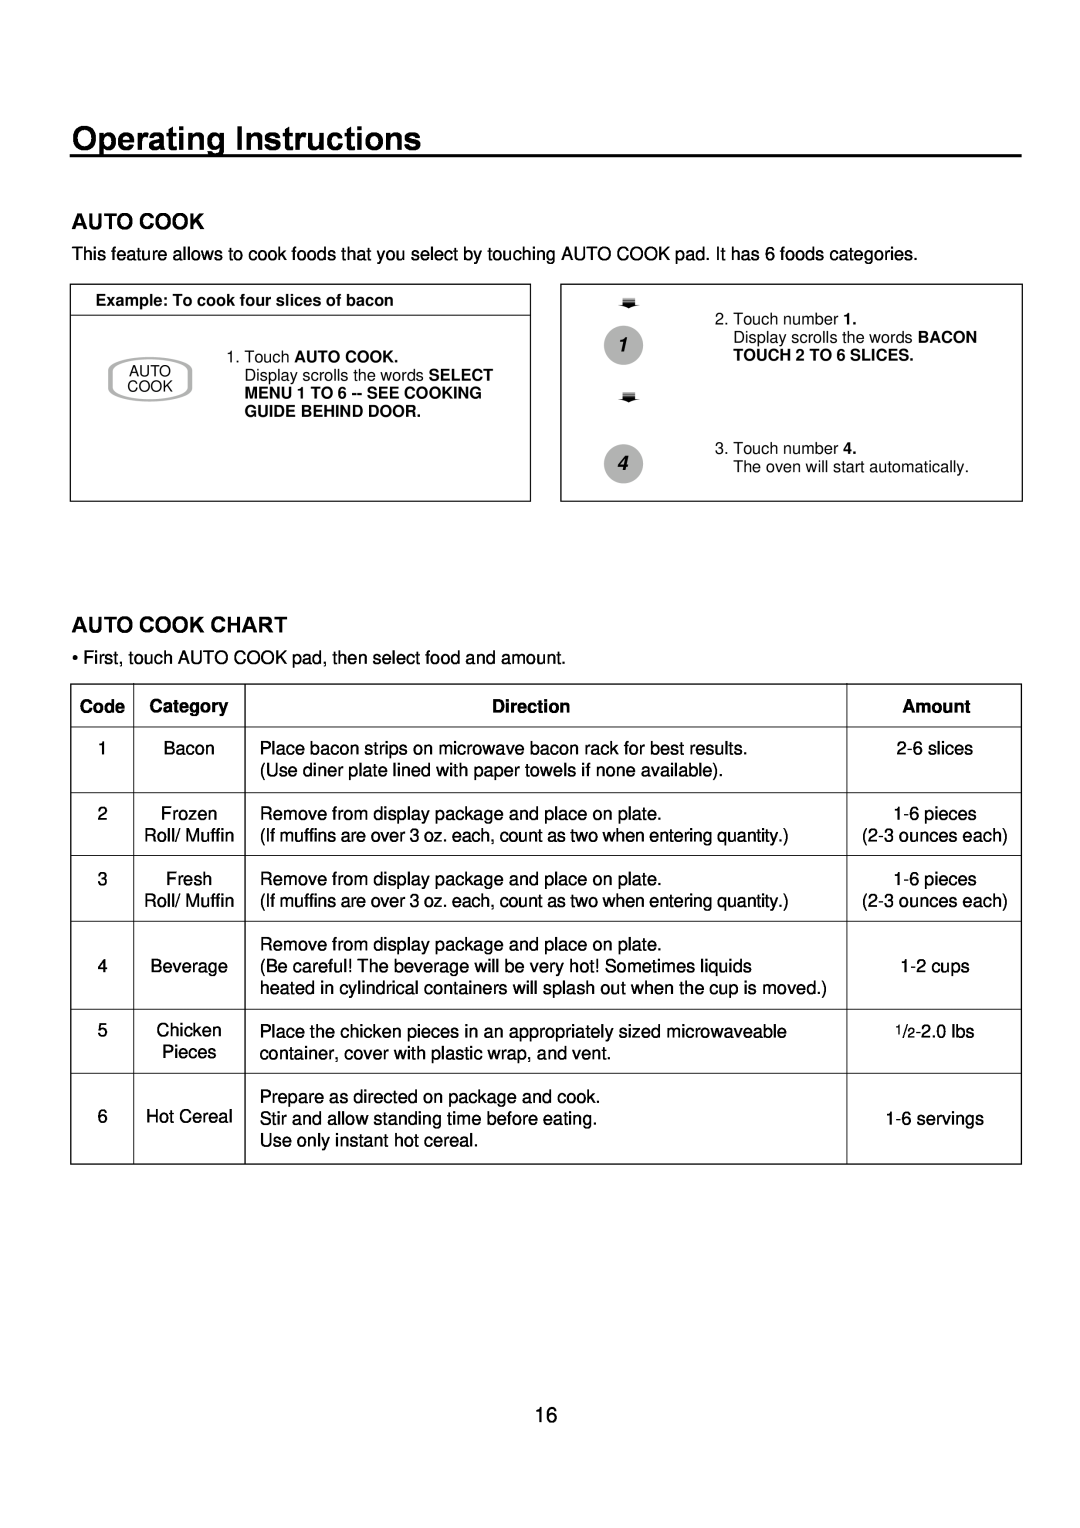 Amana ACM2160A, ACM1460A Auto Cook Chart, Operating Instructions, AUTO Display scrolls the words SELECT 